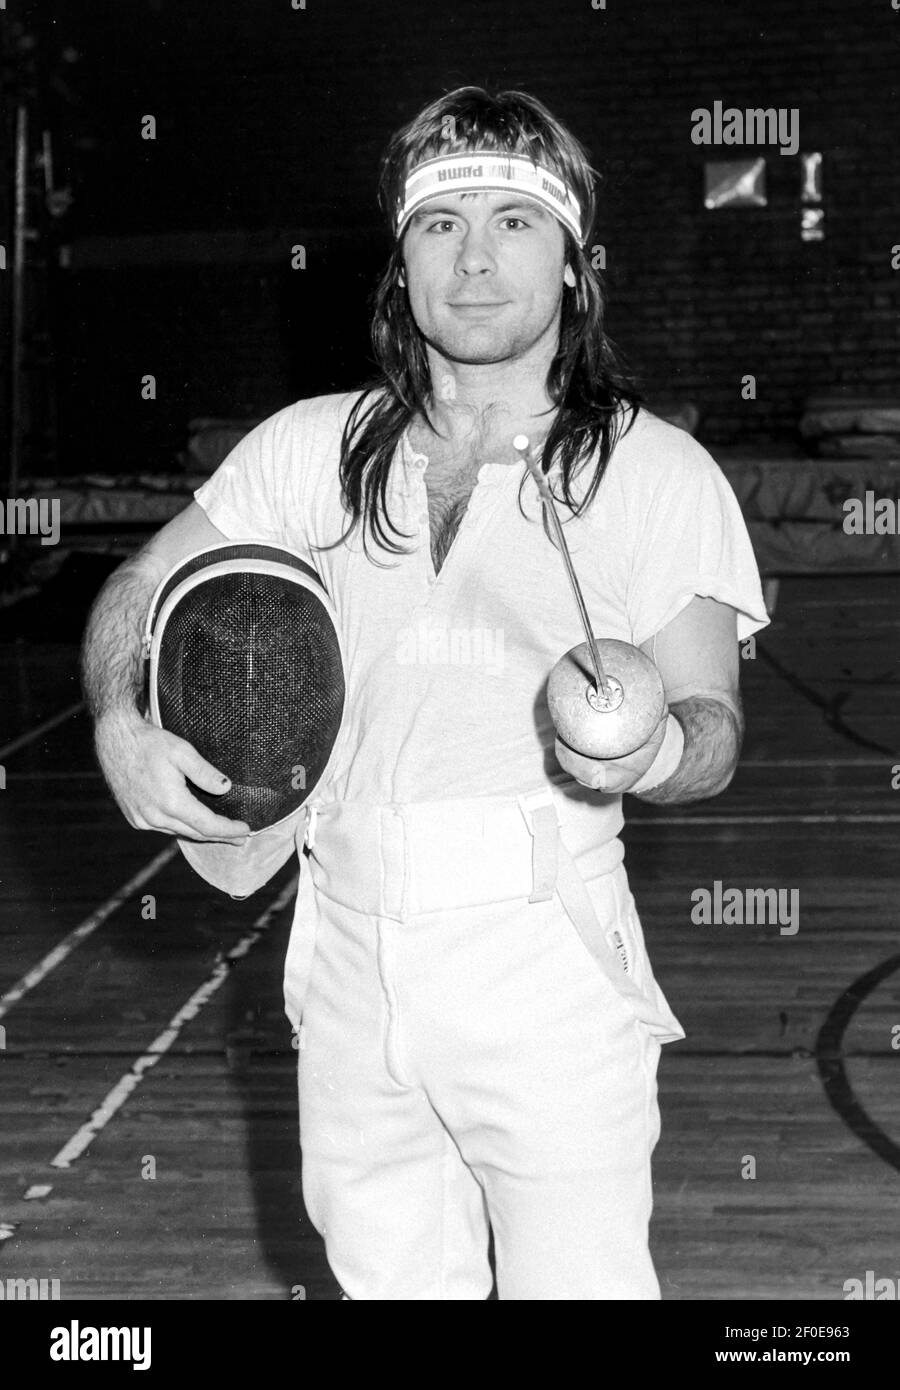 HEMEL HEMPSTEAD - ENGLAND 89:  Bruce Dickinson posing for the camera in his fencing gear at the local sports centre in Hemel Hempstead, Hertfordshire, Stock Photo